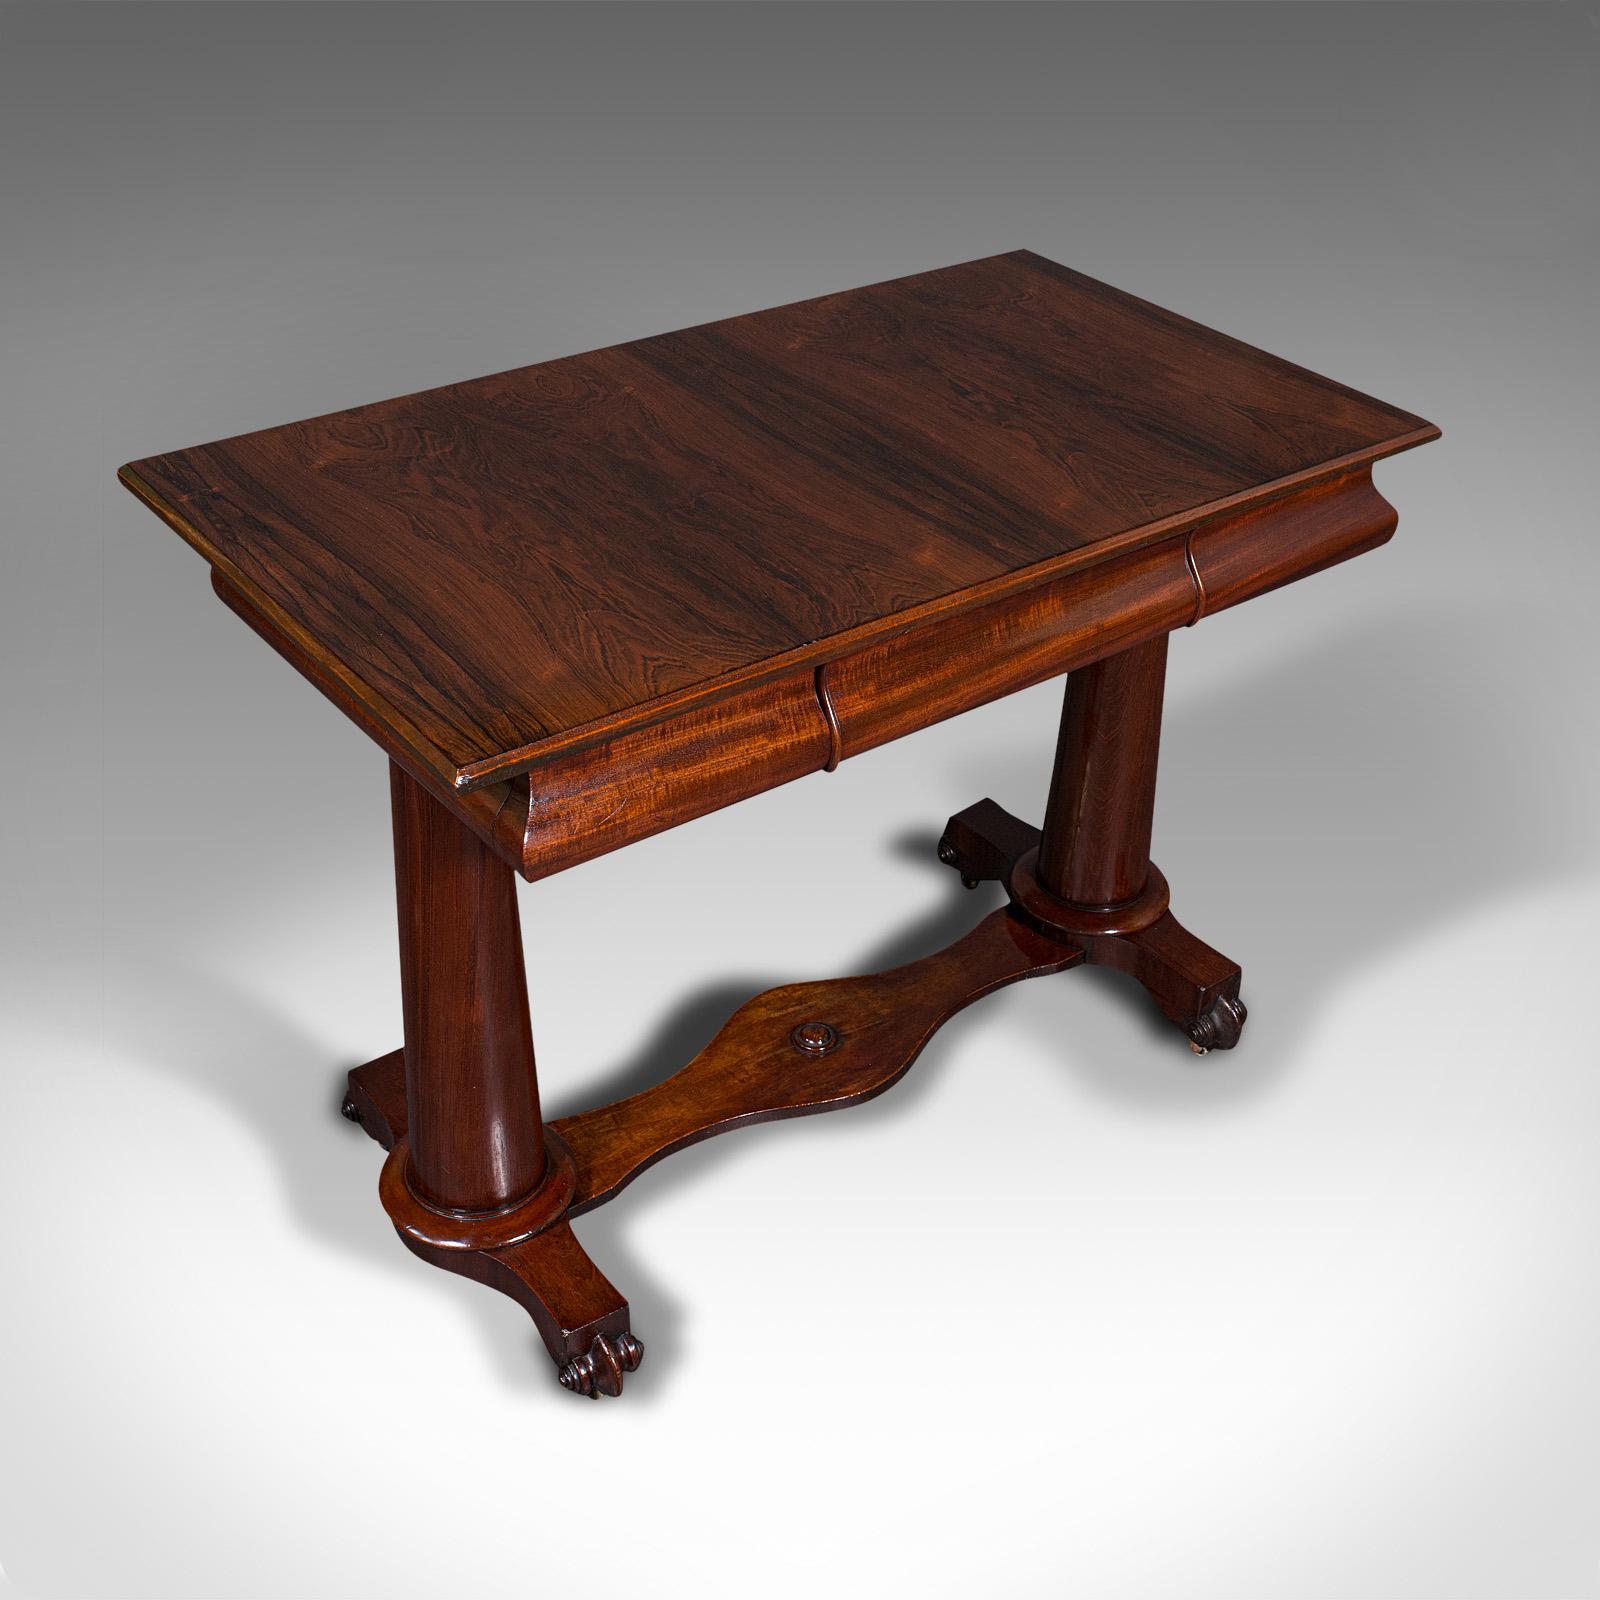 Wood Antique Console Table, English, Side, Occasional, Writing Desk, Regency, C.1820 For Sale